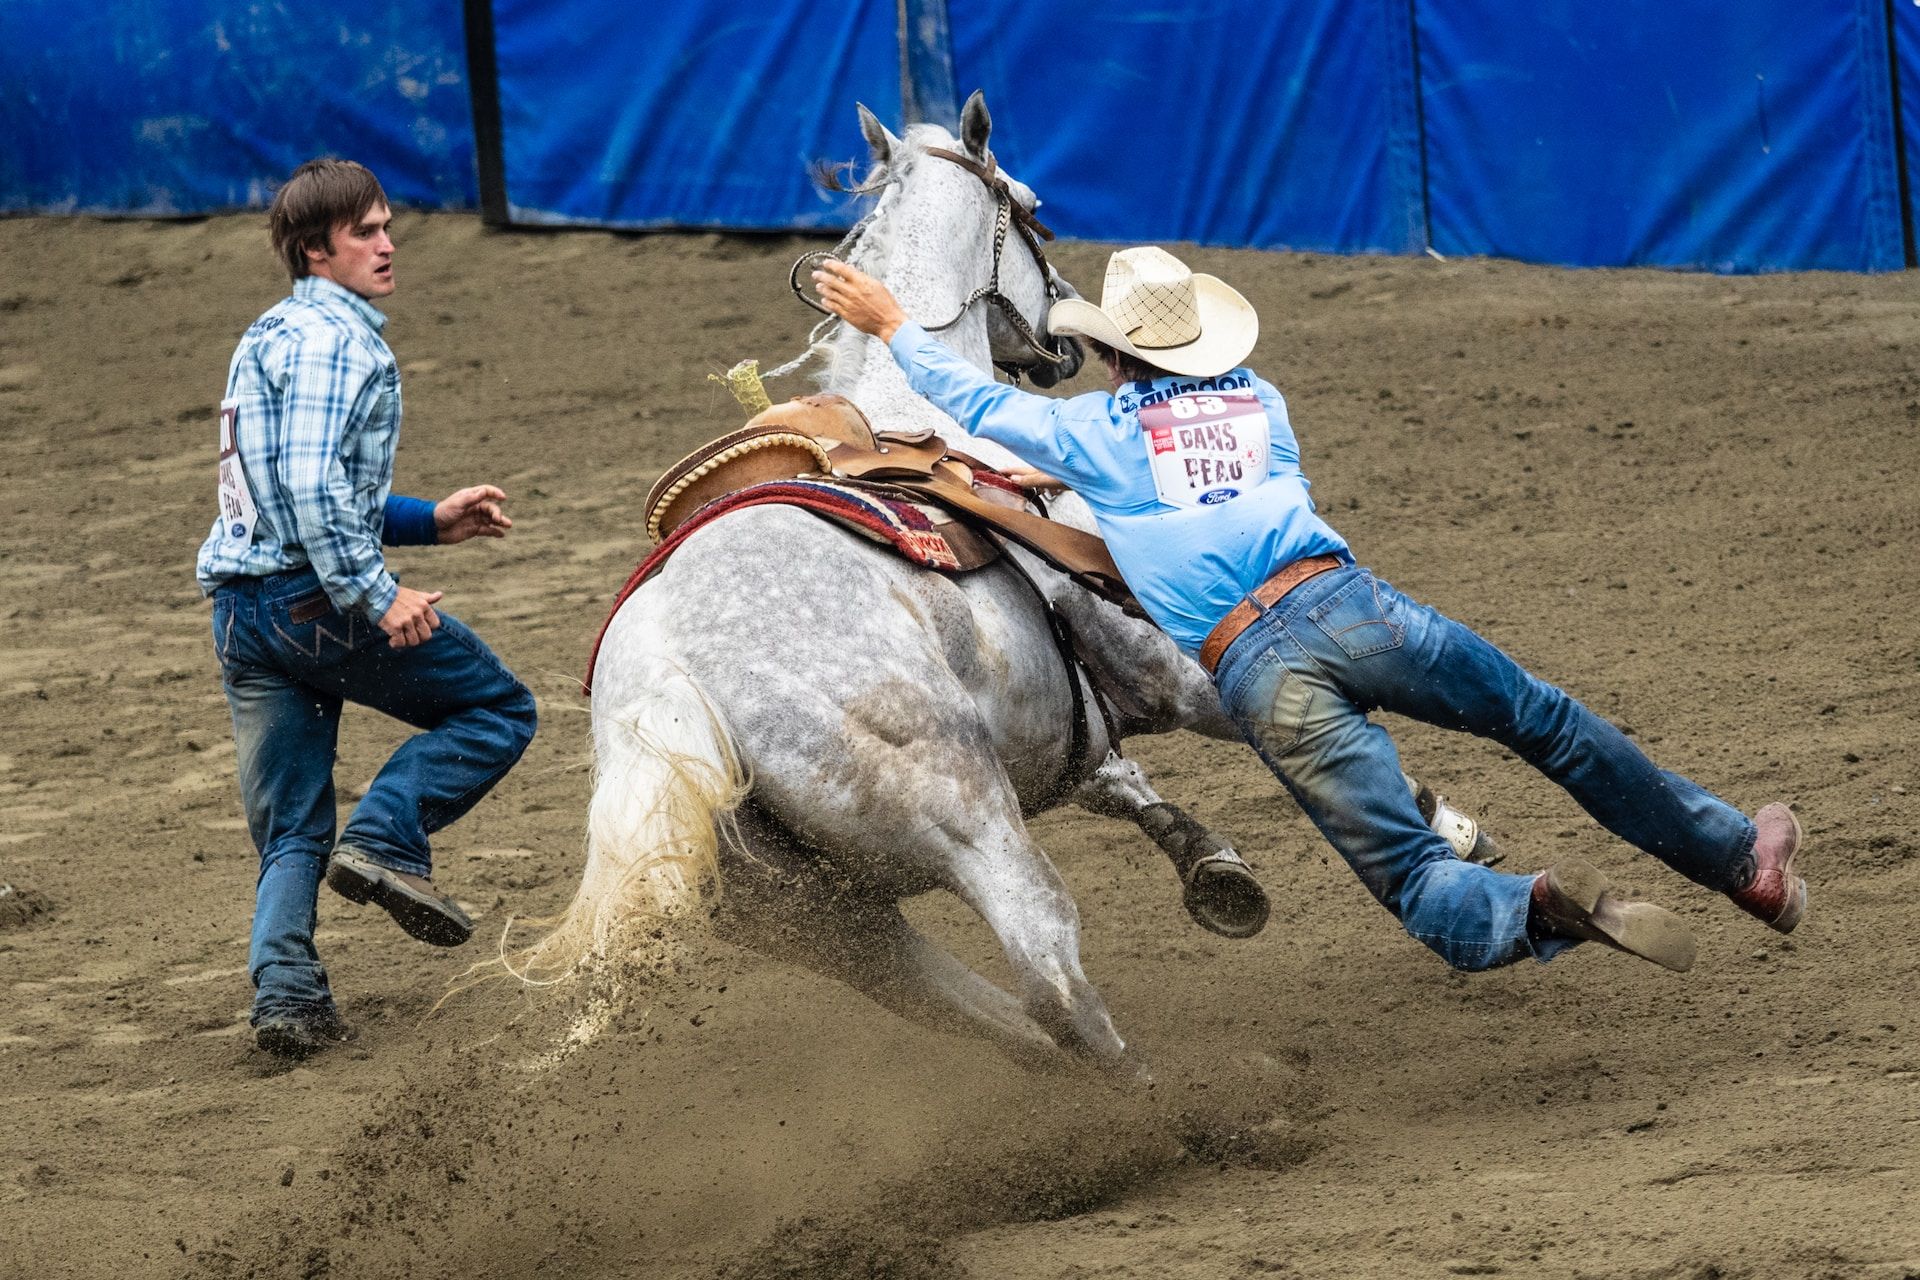 Two cowboys running after a wild horse in a Rodeo